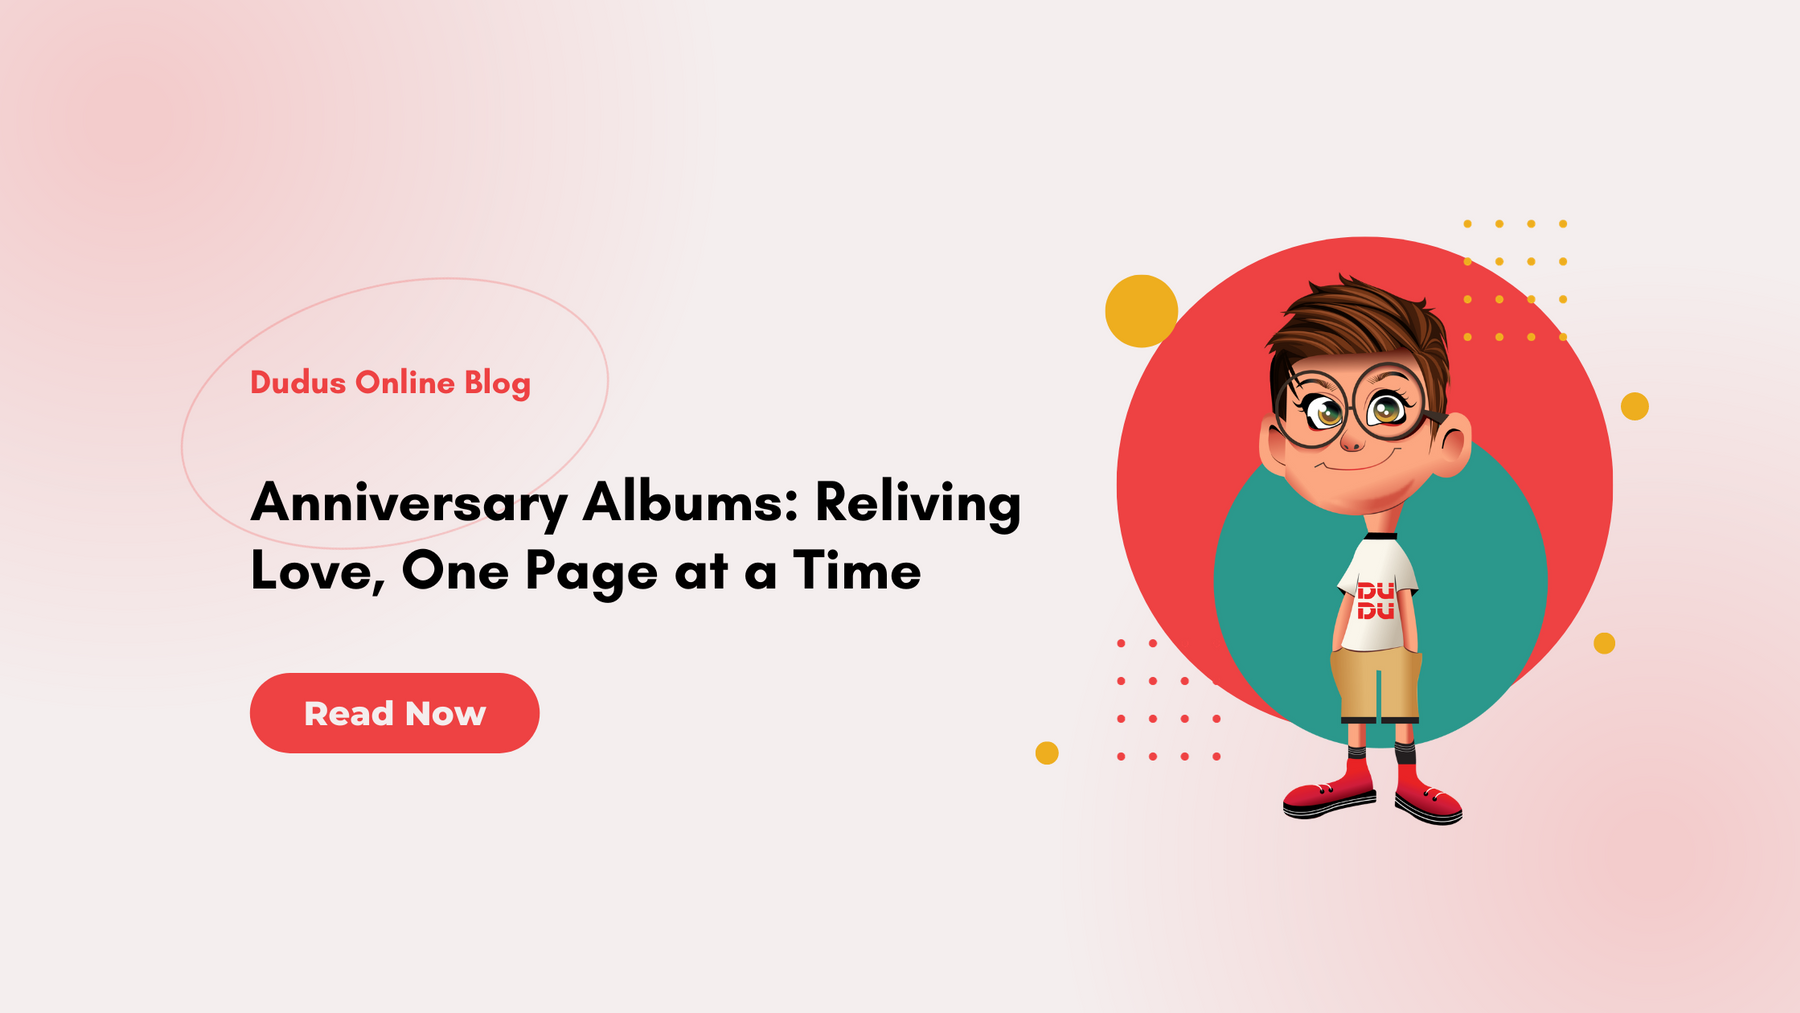 Anniversary Albums: Reliving Love, One Page at a Time